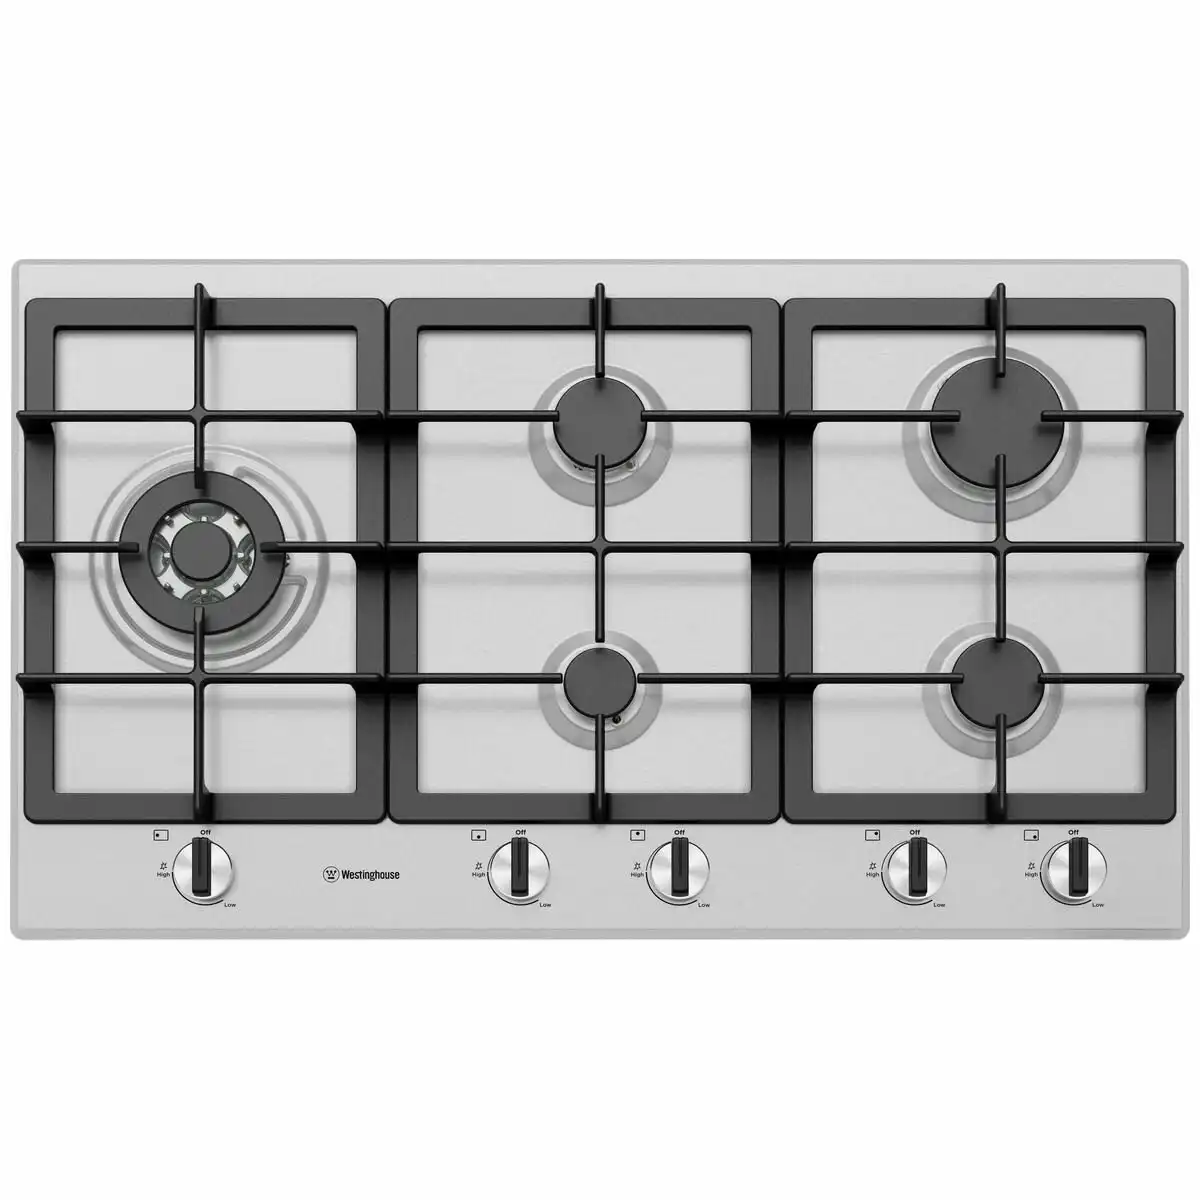 Westinghouse 90cm 5 Burner Natural Gas Stainless Steel Cooktop